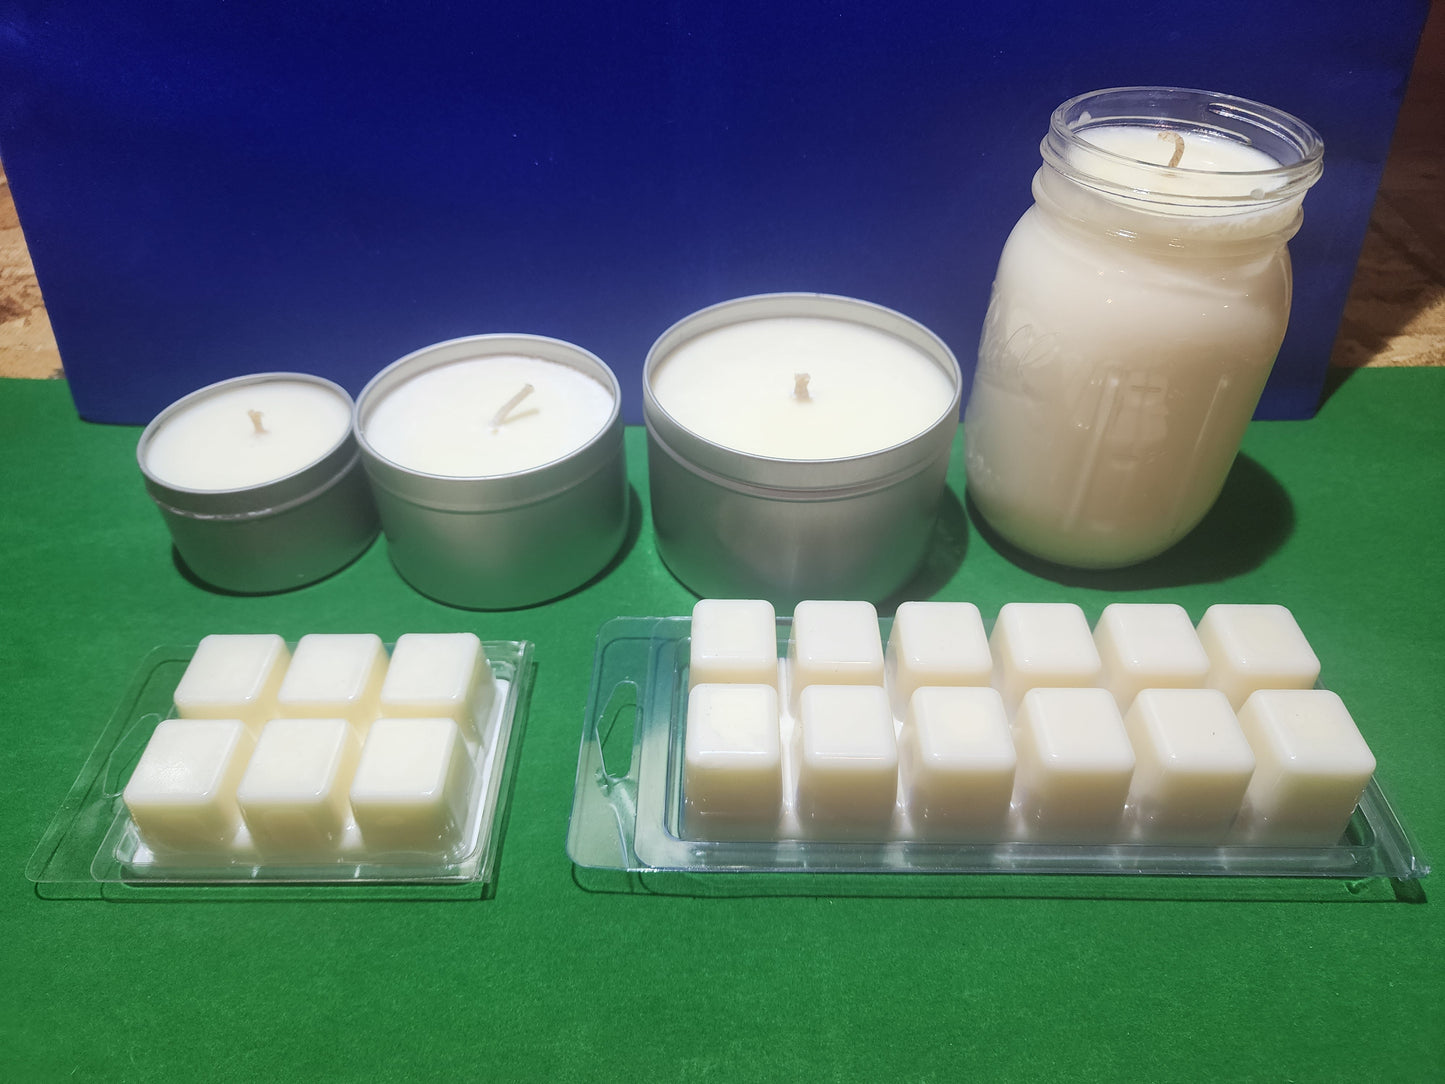 Birthday Cake Soy Candles & Wax Melts